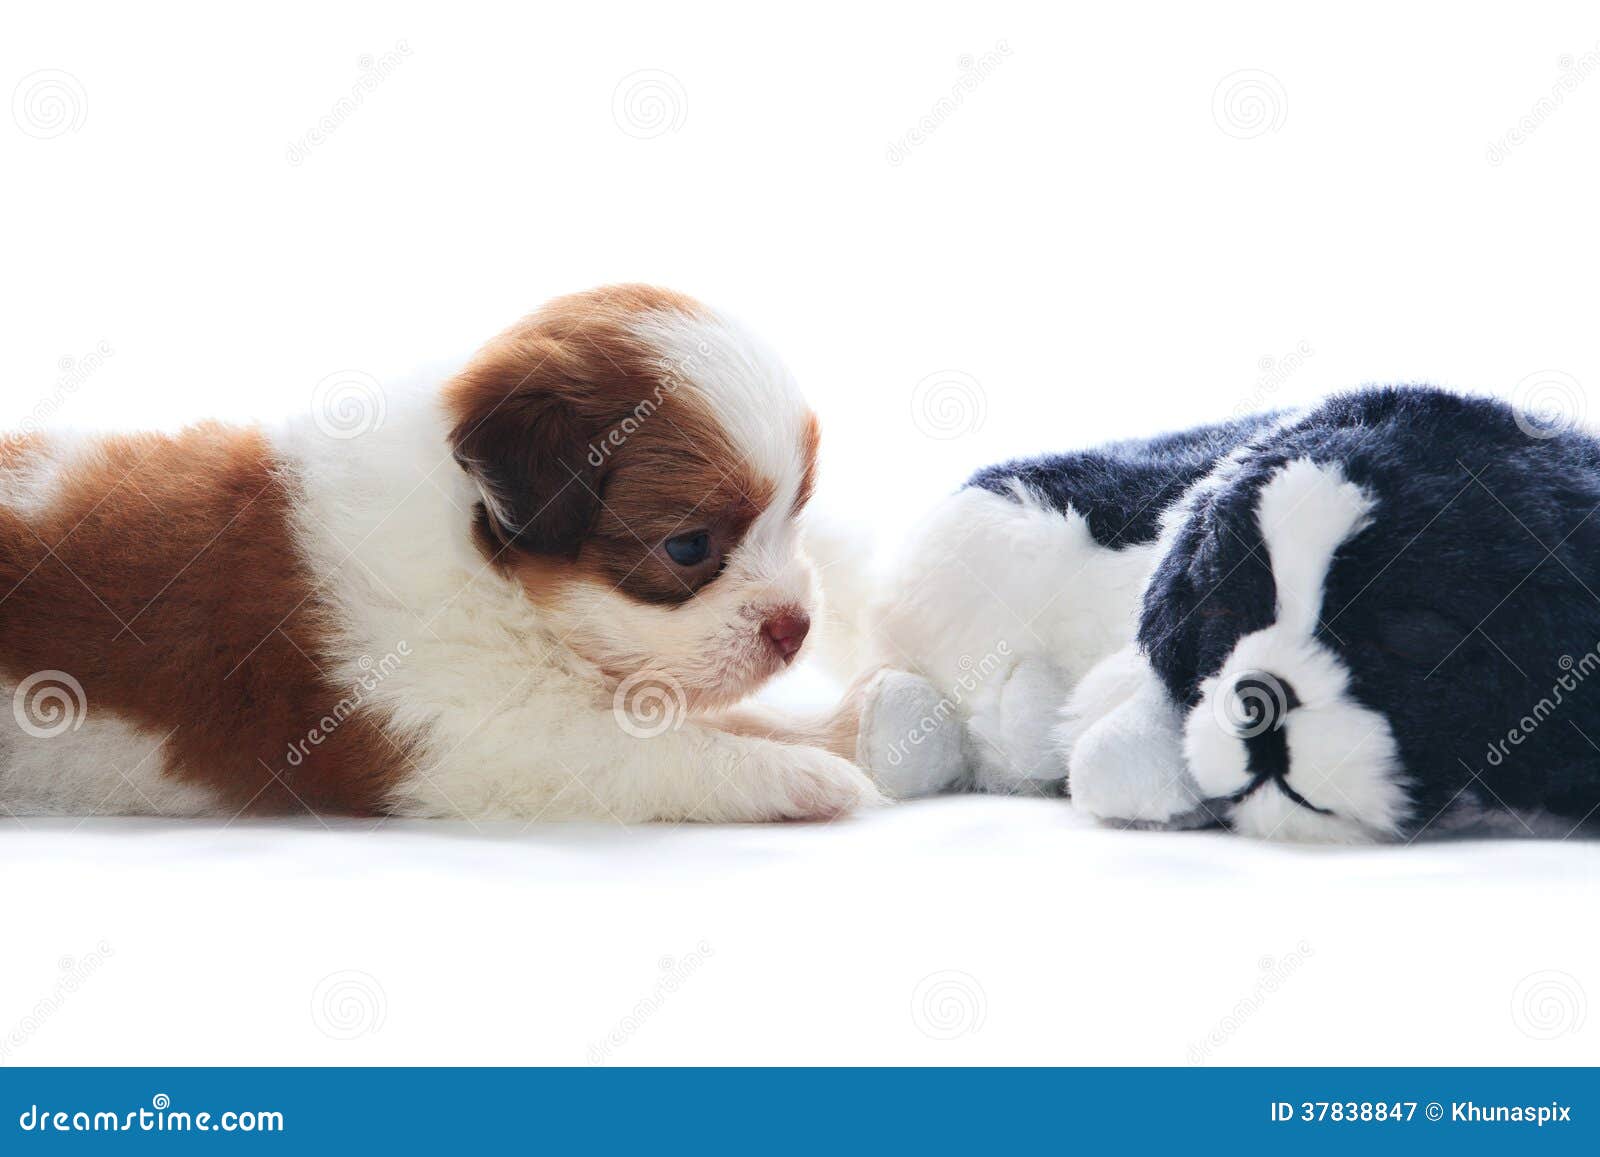 adorable of pedigree shih tzu puppies dog rekaxing and lying on